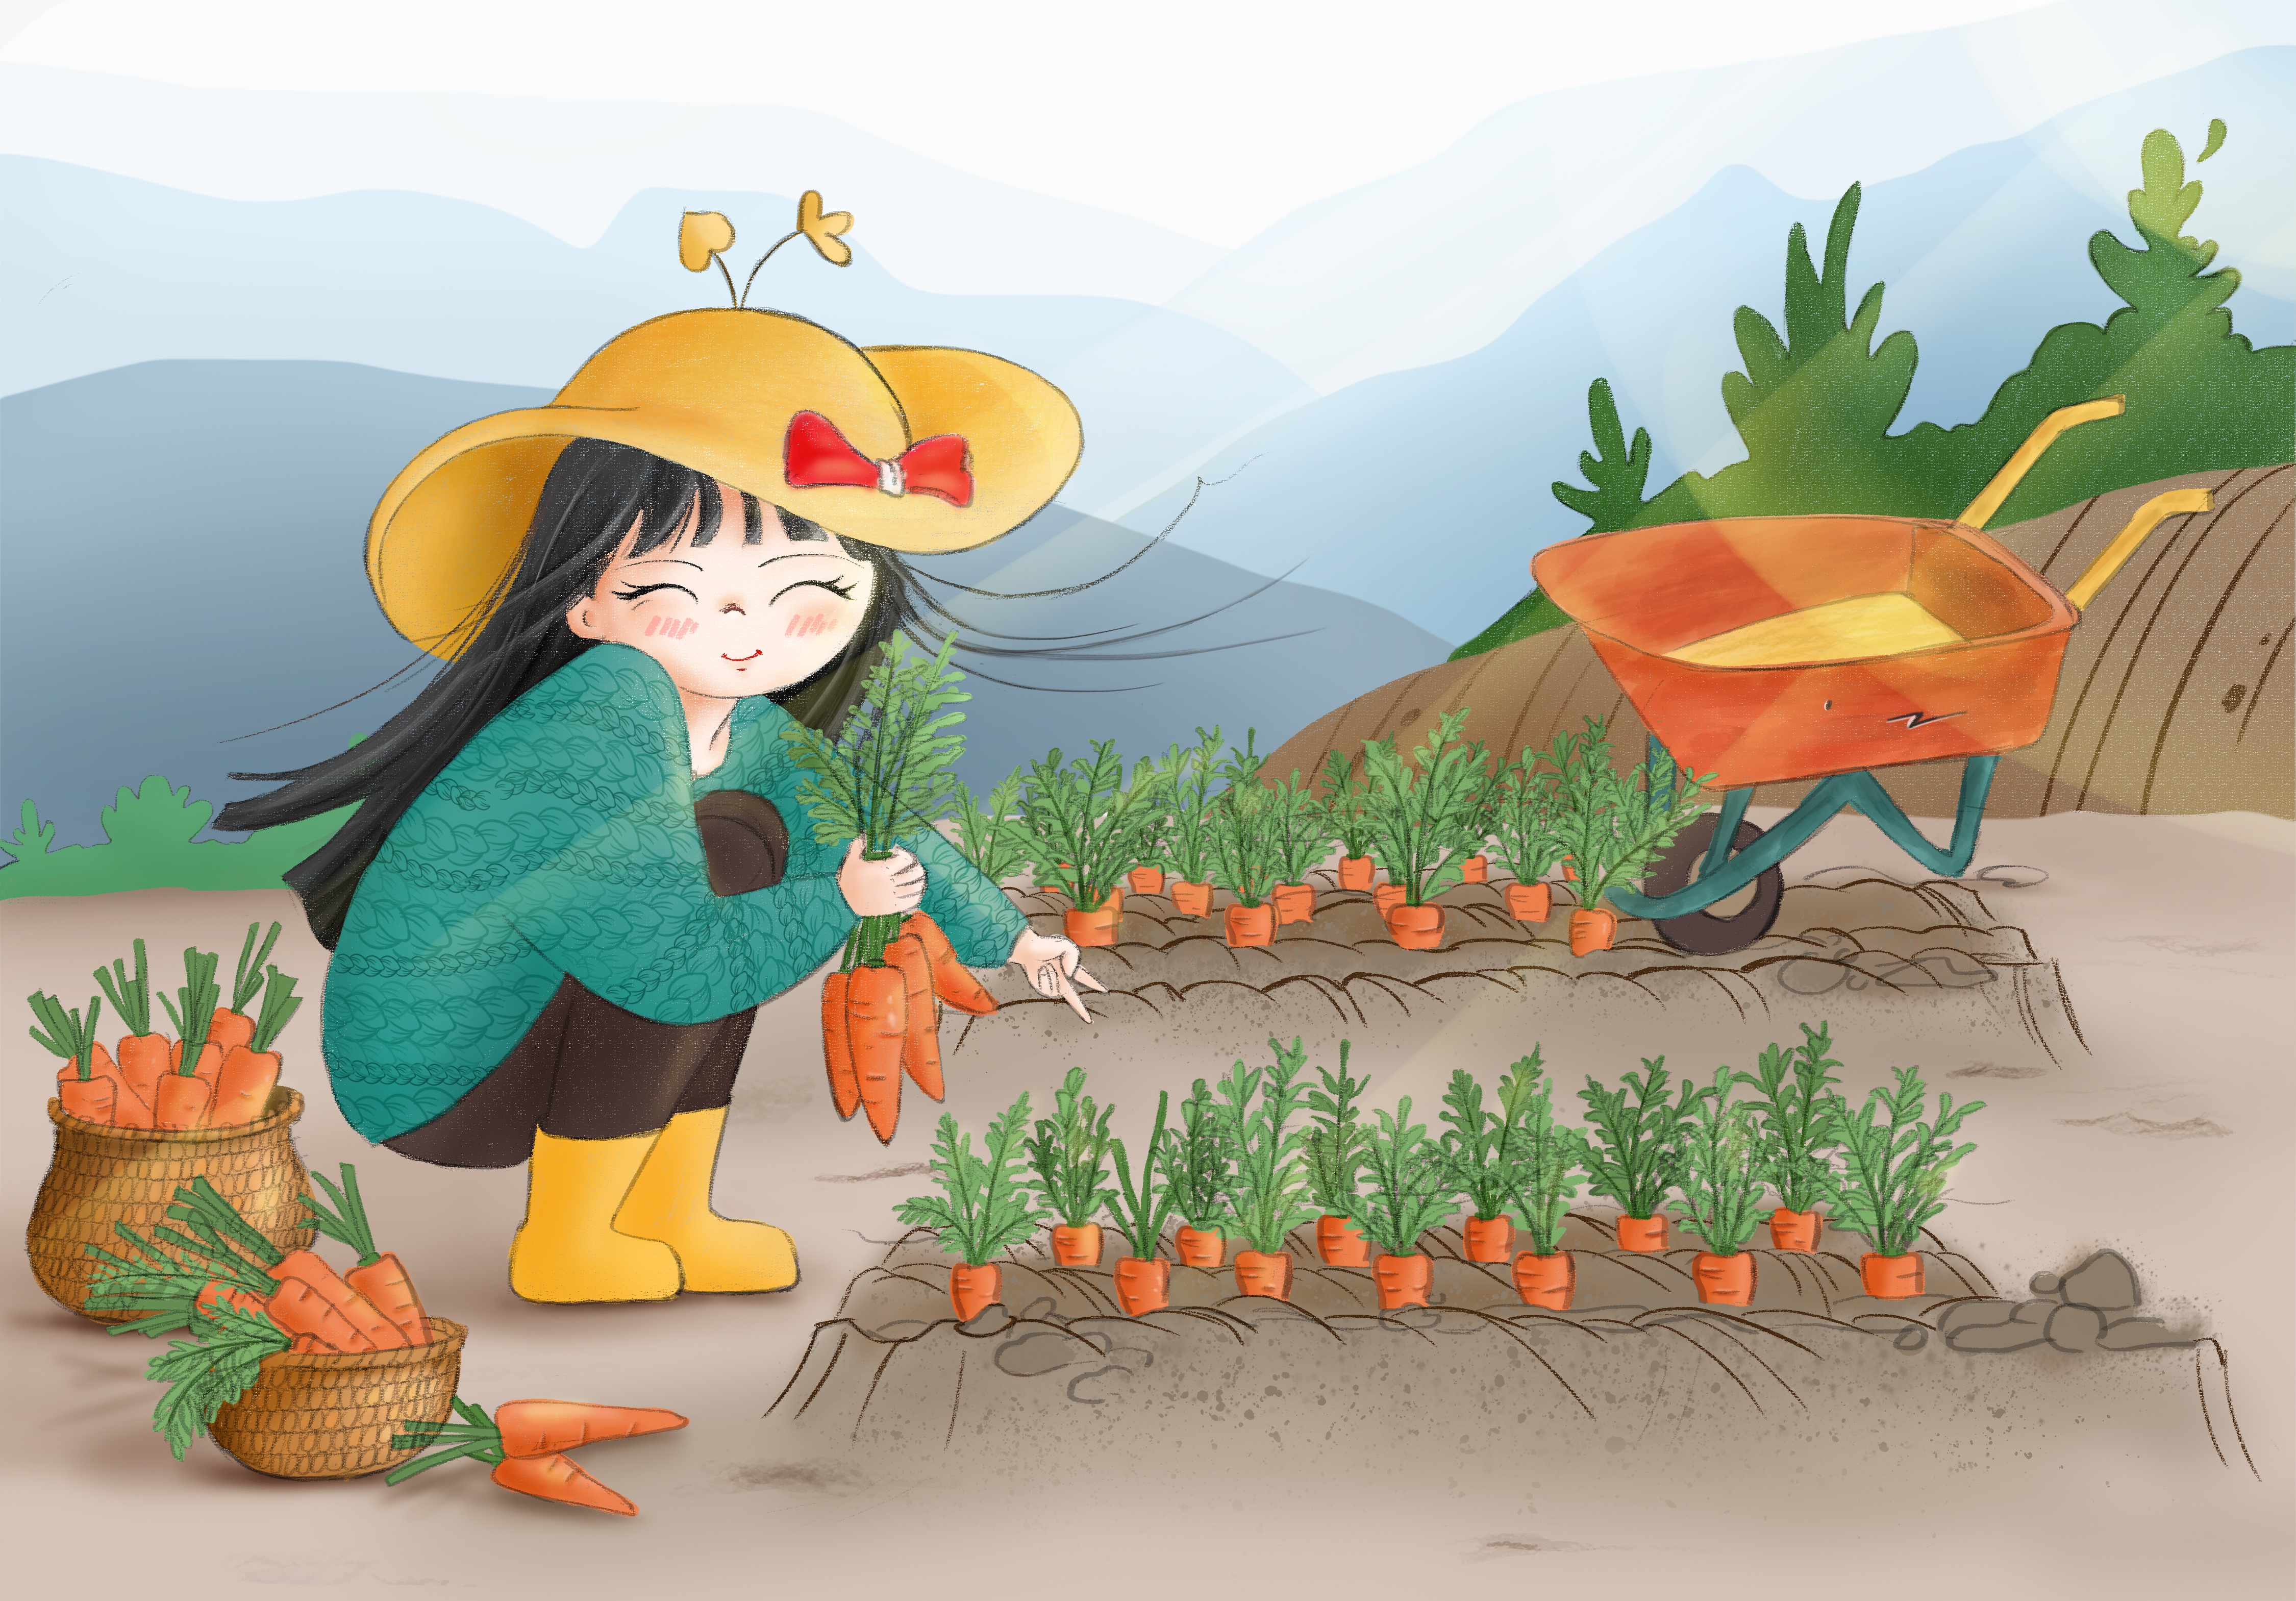 Girl in a vegetable garden with carrots.